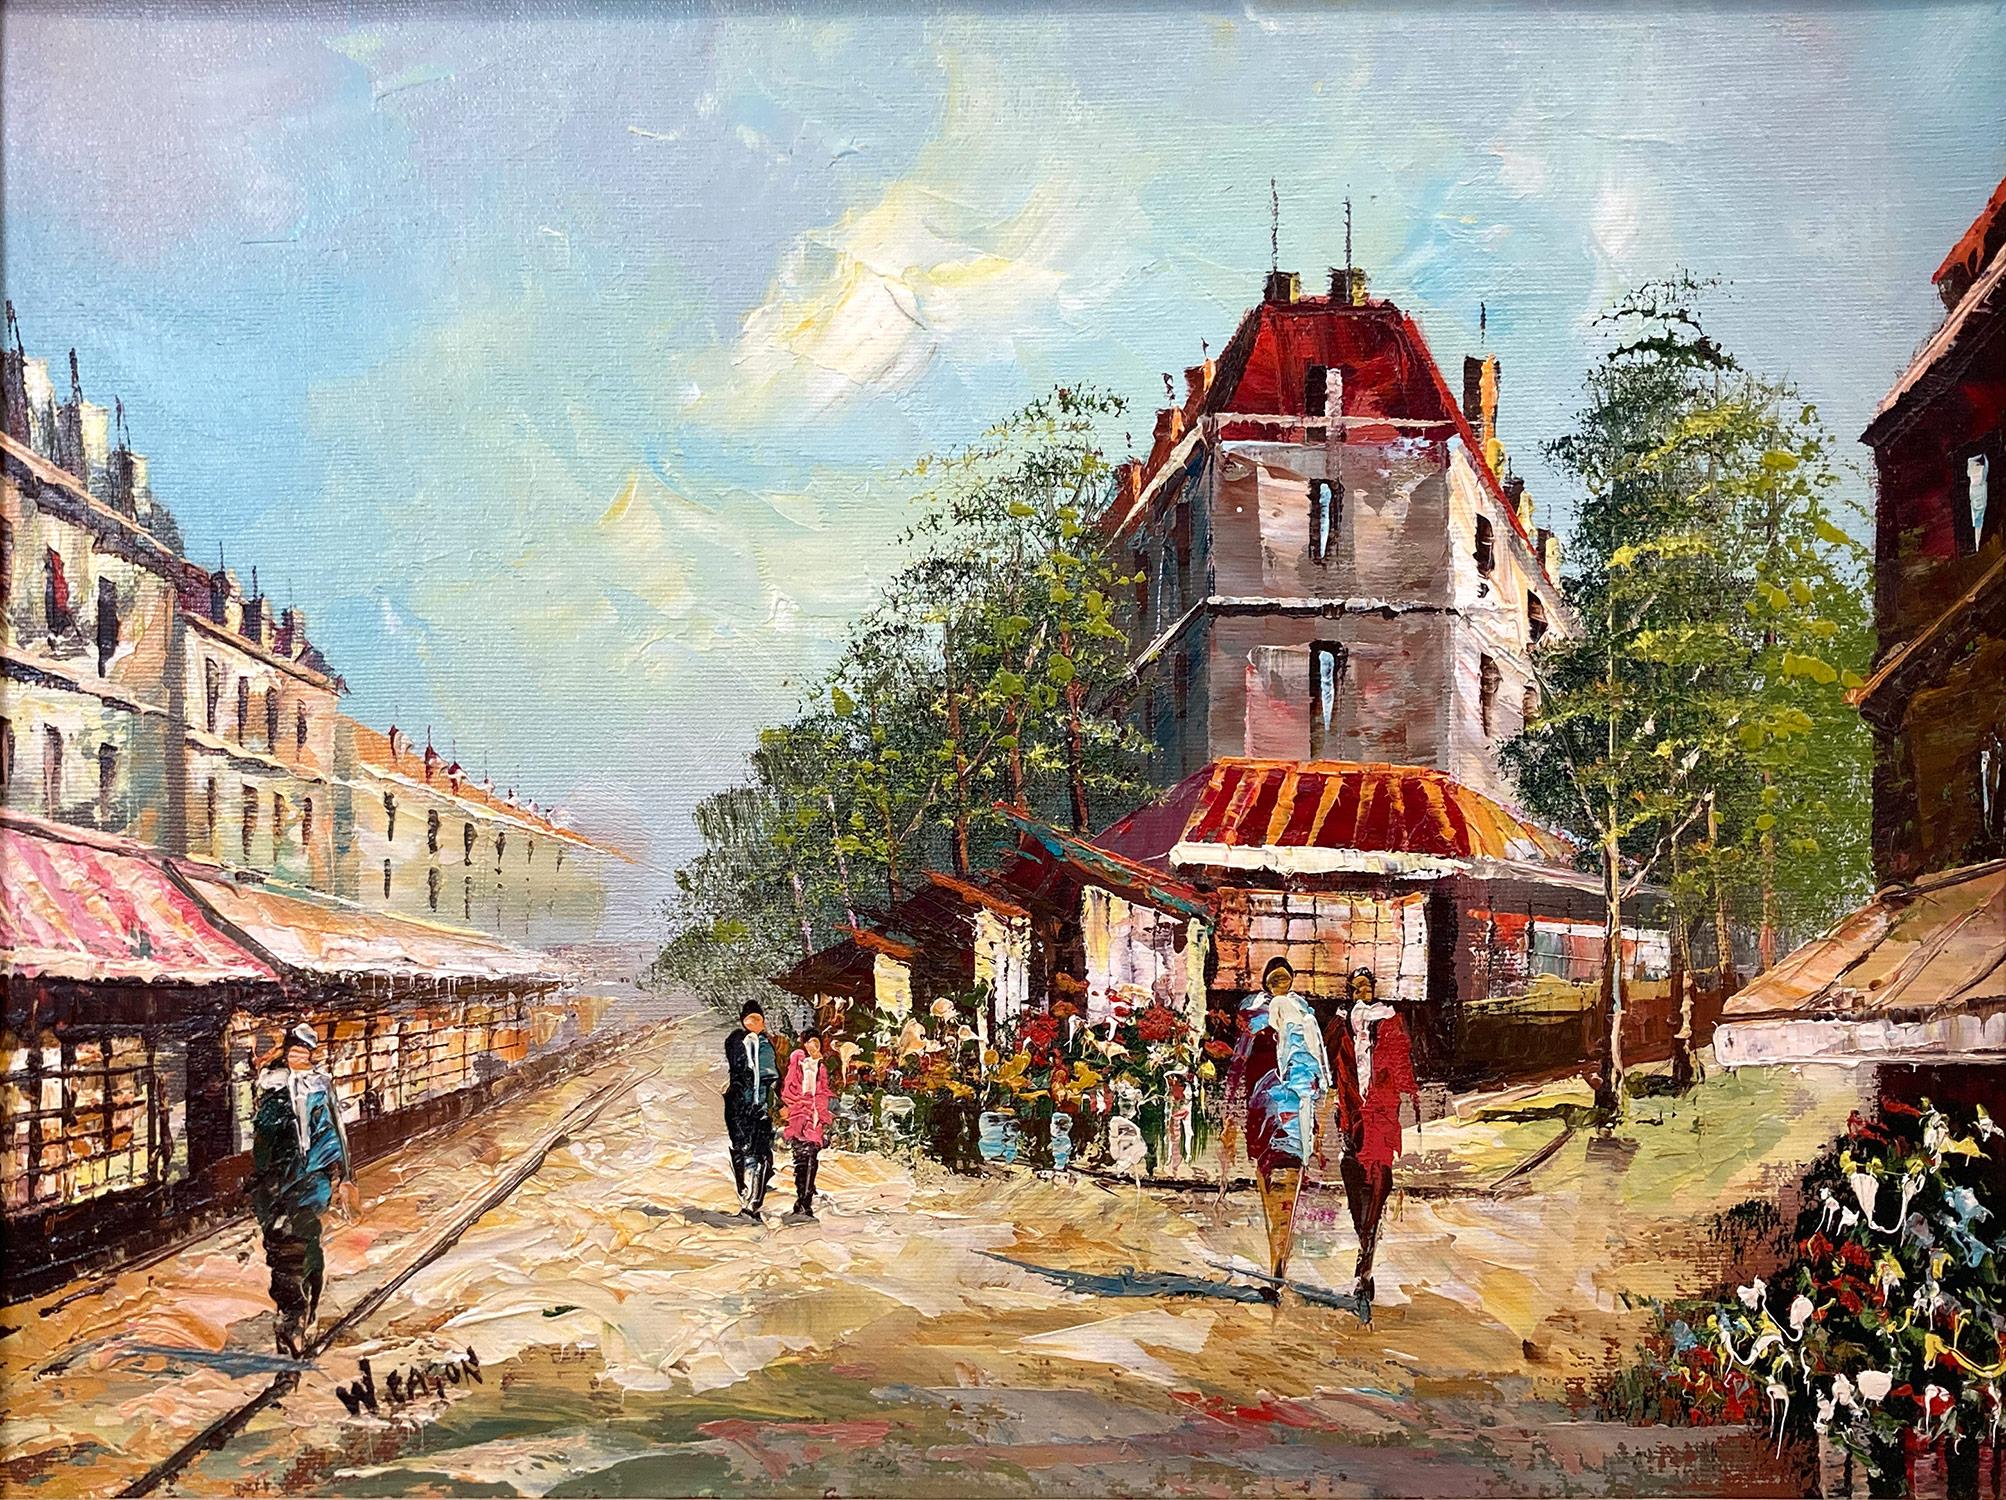 In this piece, the artist depicts his subject in an abstract and impressionistic way, capturing the streets of Paris in a whimsical way from the 20th Century with much life. The artist mostly used oil with a pallet knife, with impasto paint, and